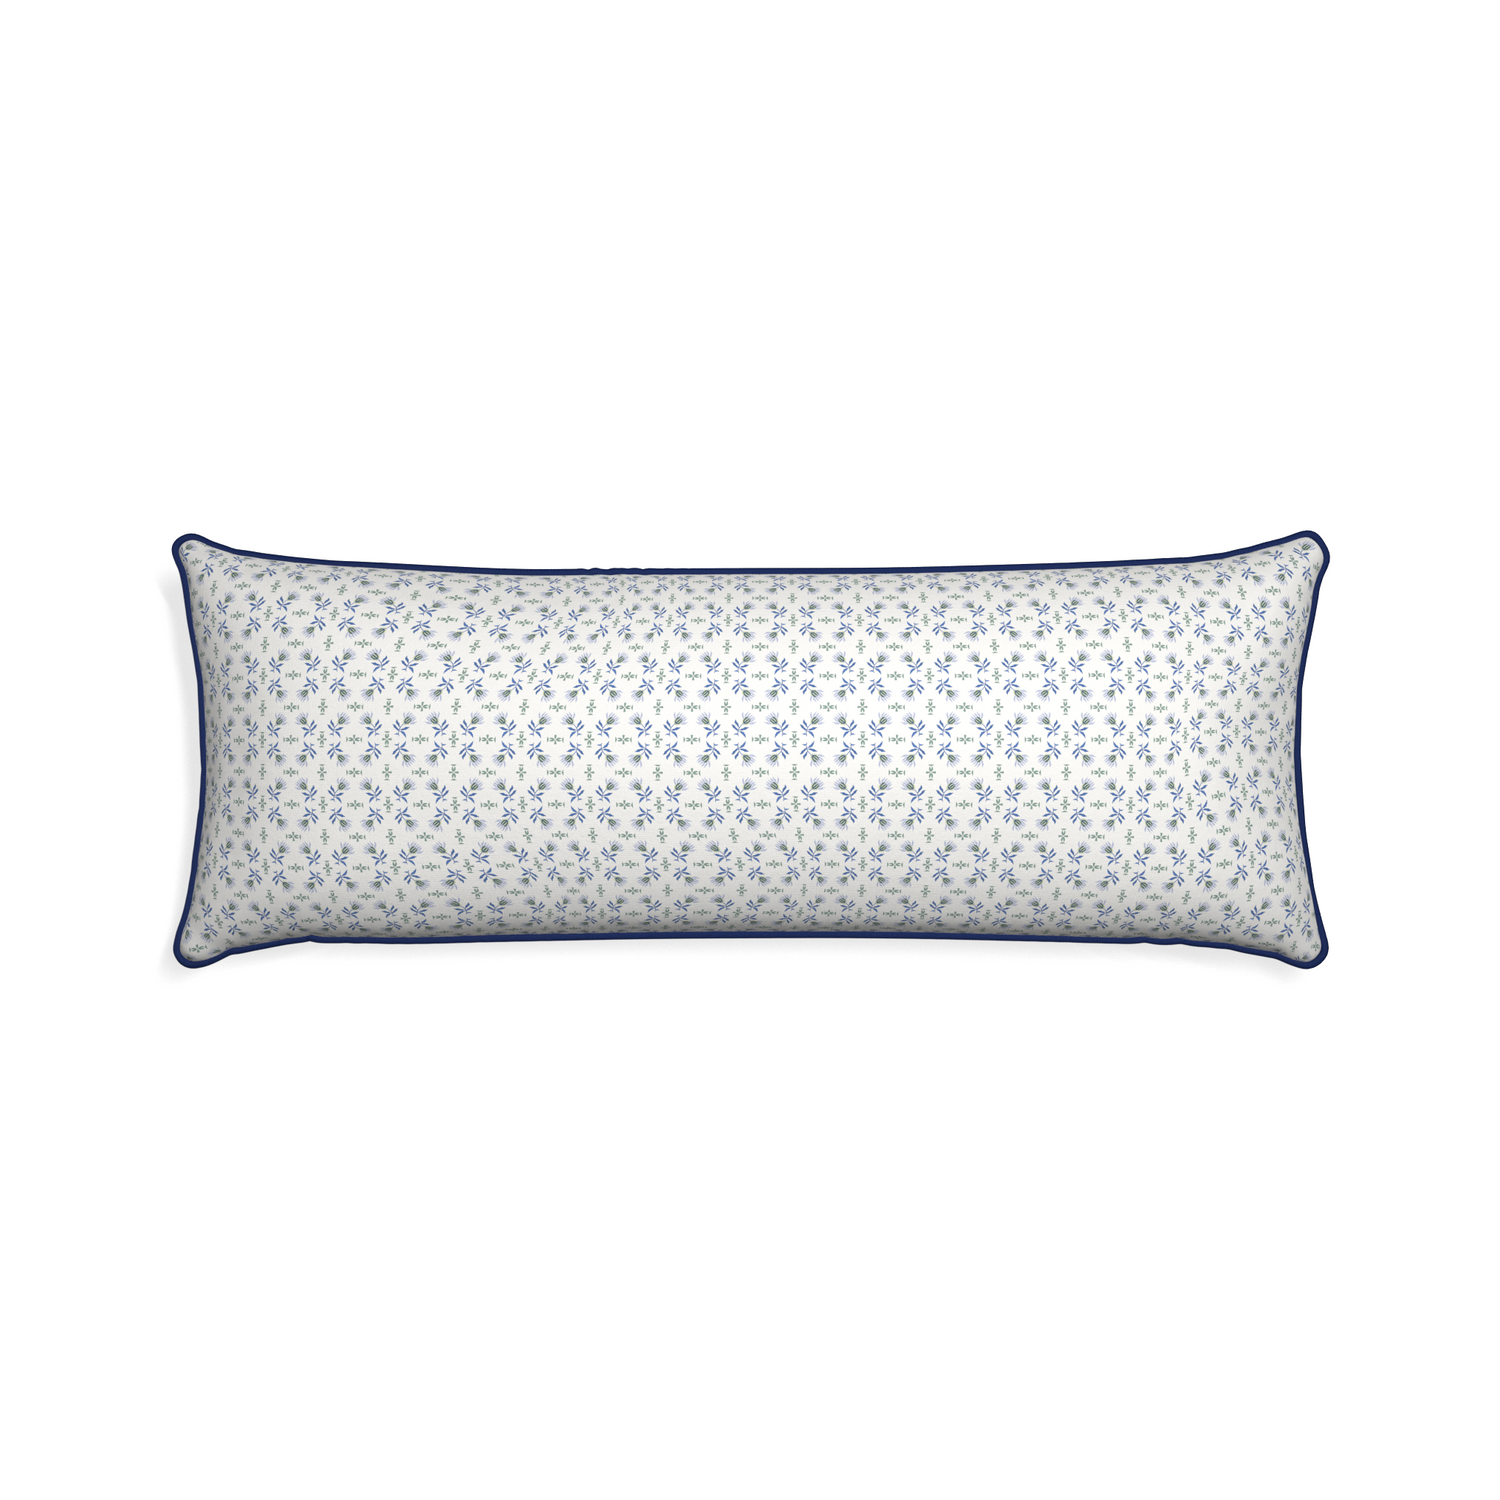 Xl-lumbar lee custom pillow with midnight piping on white background